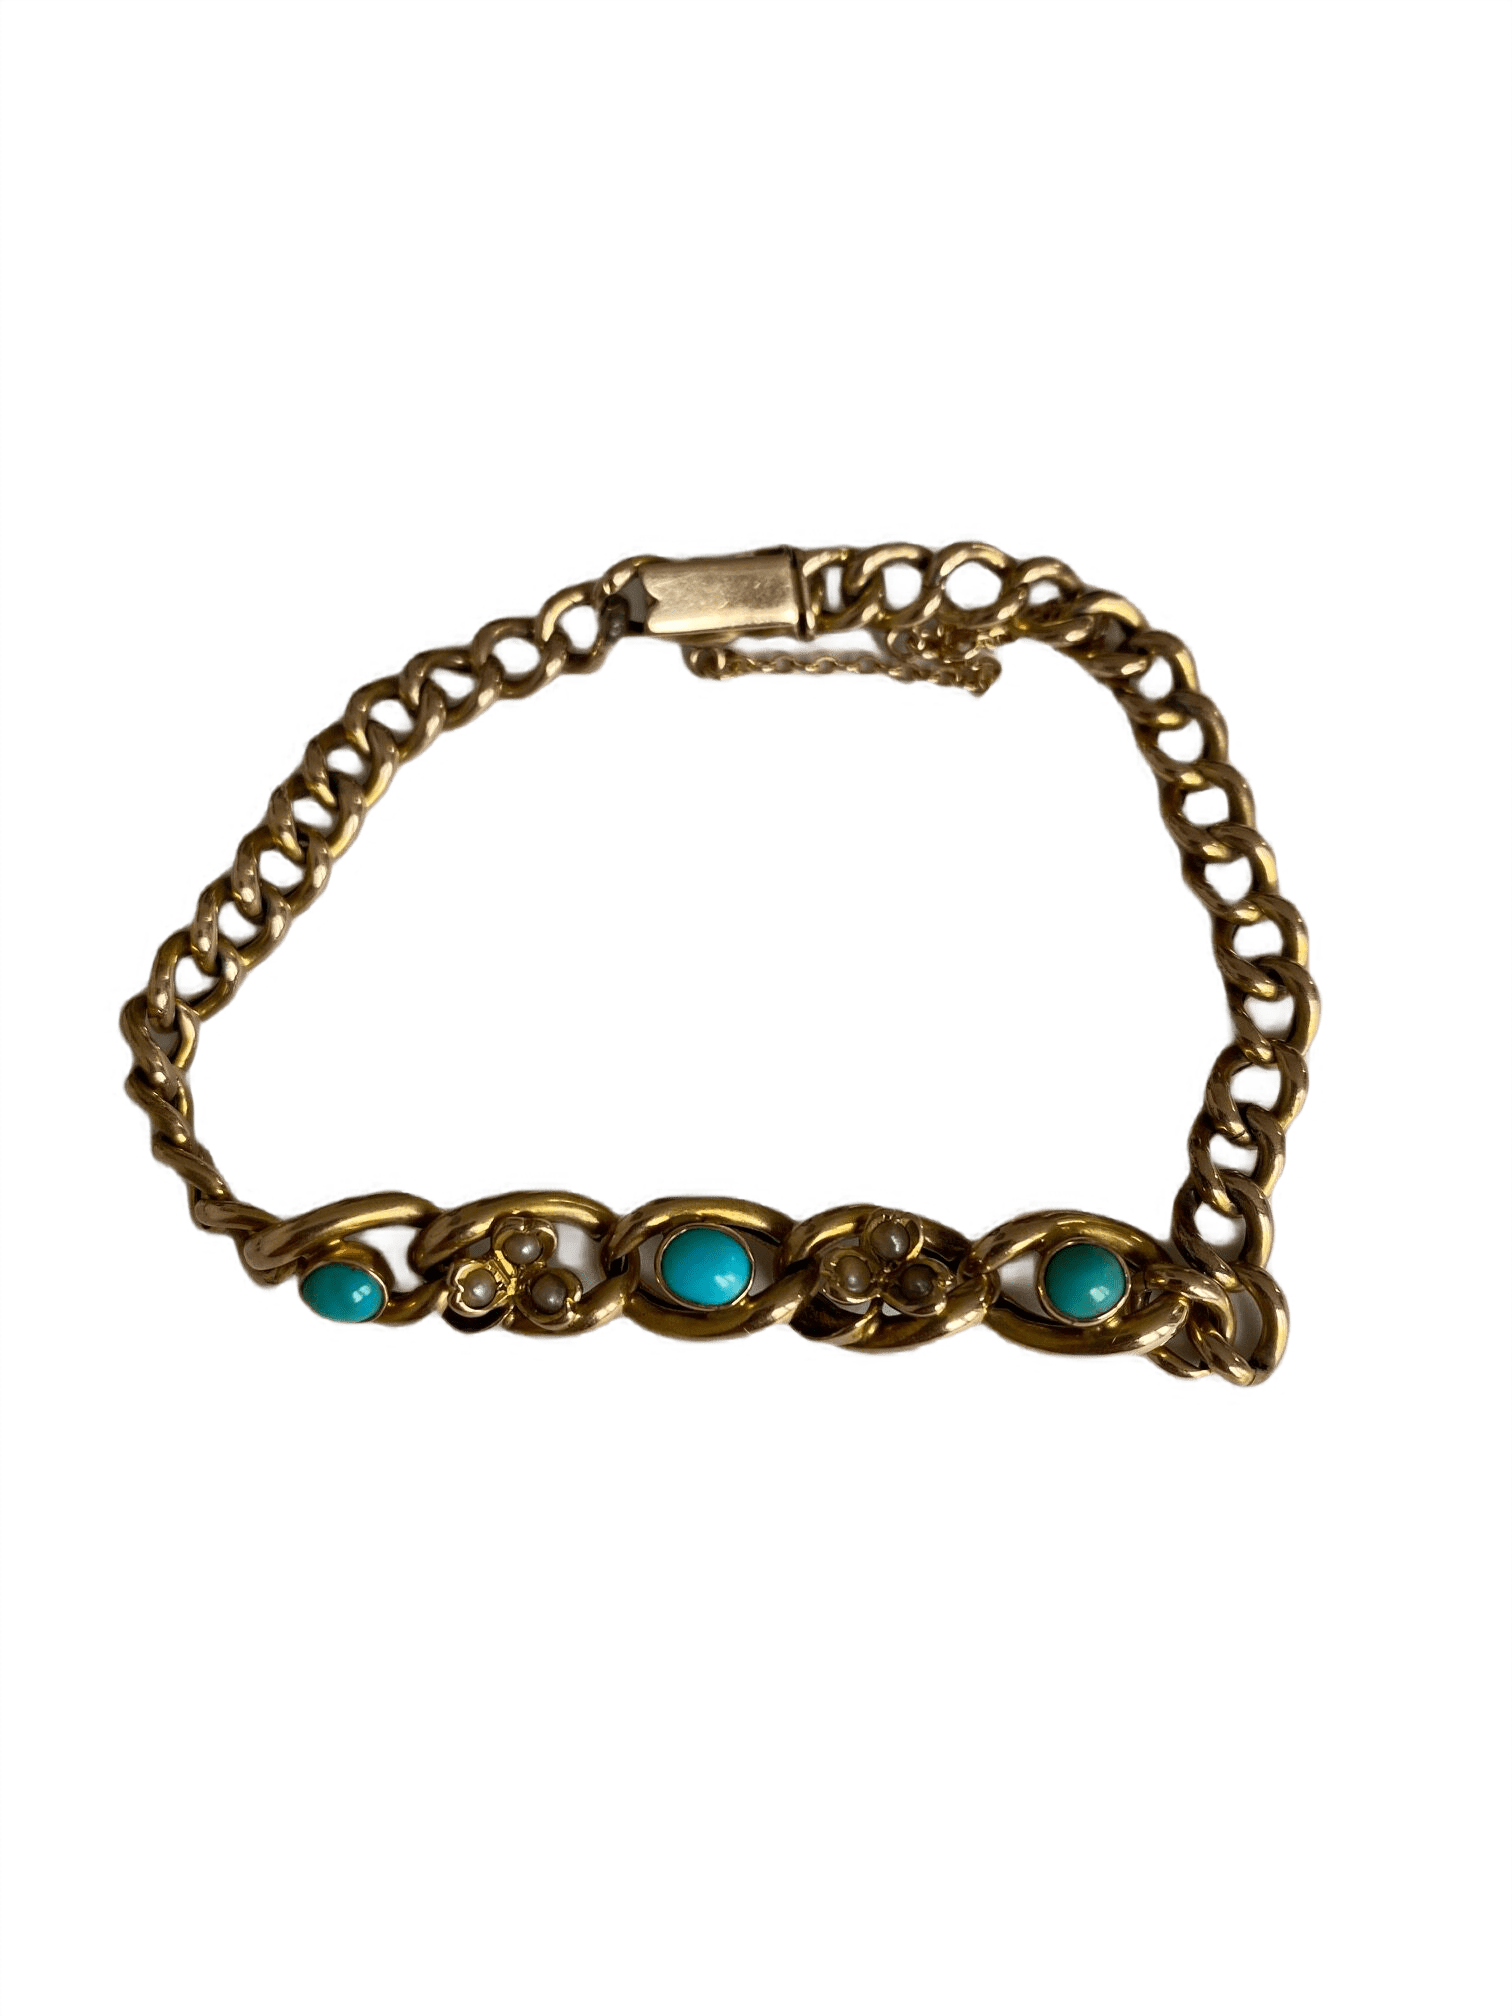 Edwardian Turquoise and Pearl Bracelet - 9ct Gold | Anadej - Art ...